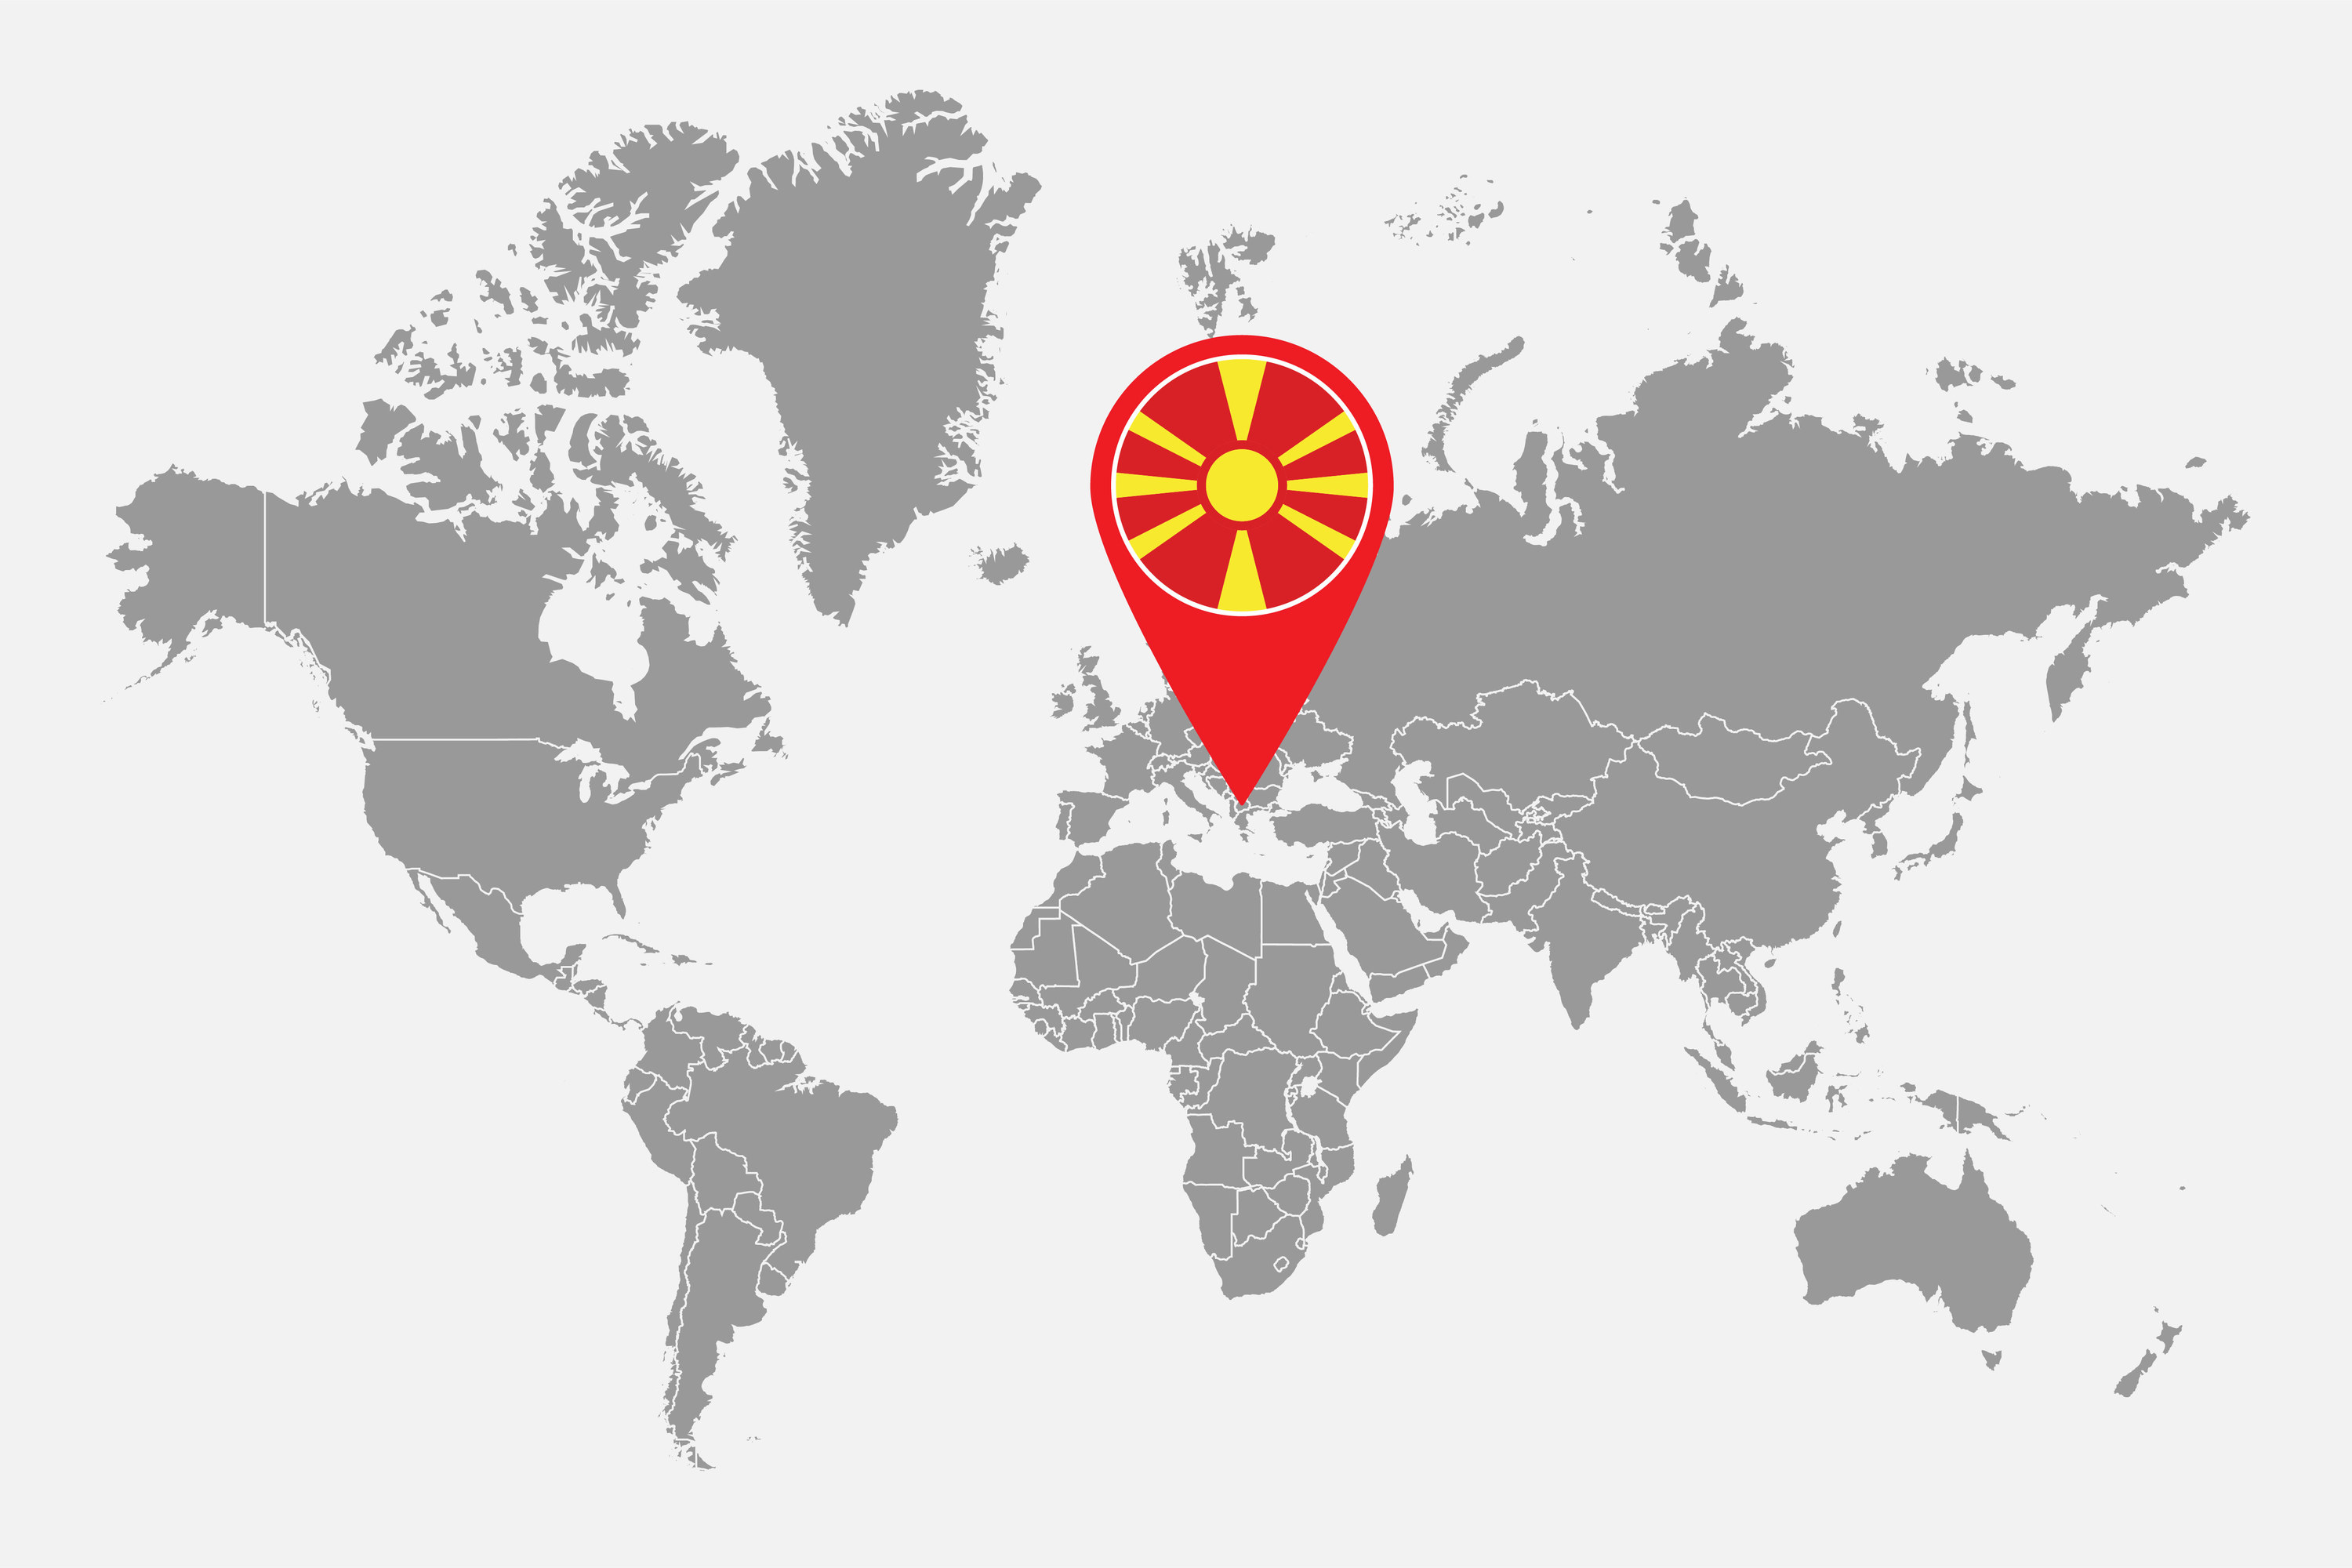 A world map with North Macedonia indicated